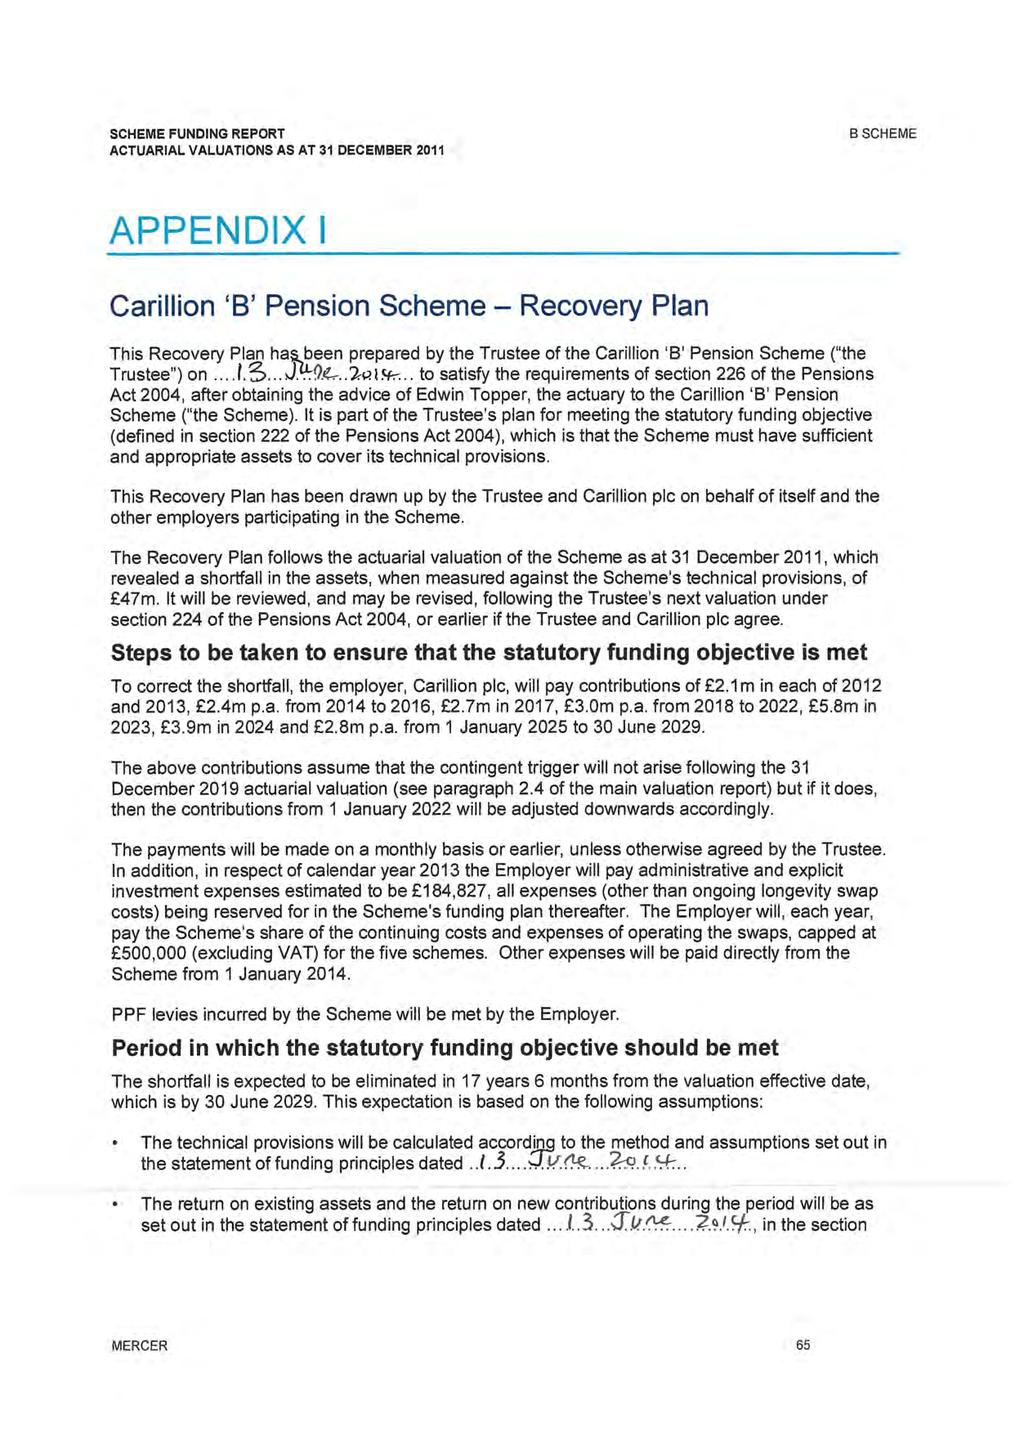 B SCHEME APPENDIX I Carillion 'B' Pension Scheme - Recovery Plan This Recovery Plan hahleen prepared by the Trustee of the Carillion '8 1 Pension Scheme ("the Trustee 11 ) on... t.3... J... 9.t.-.. 'lal~.